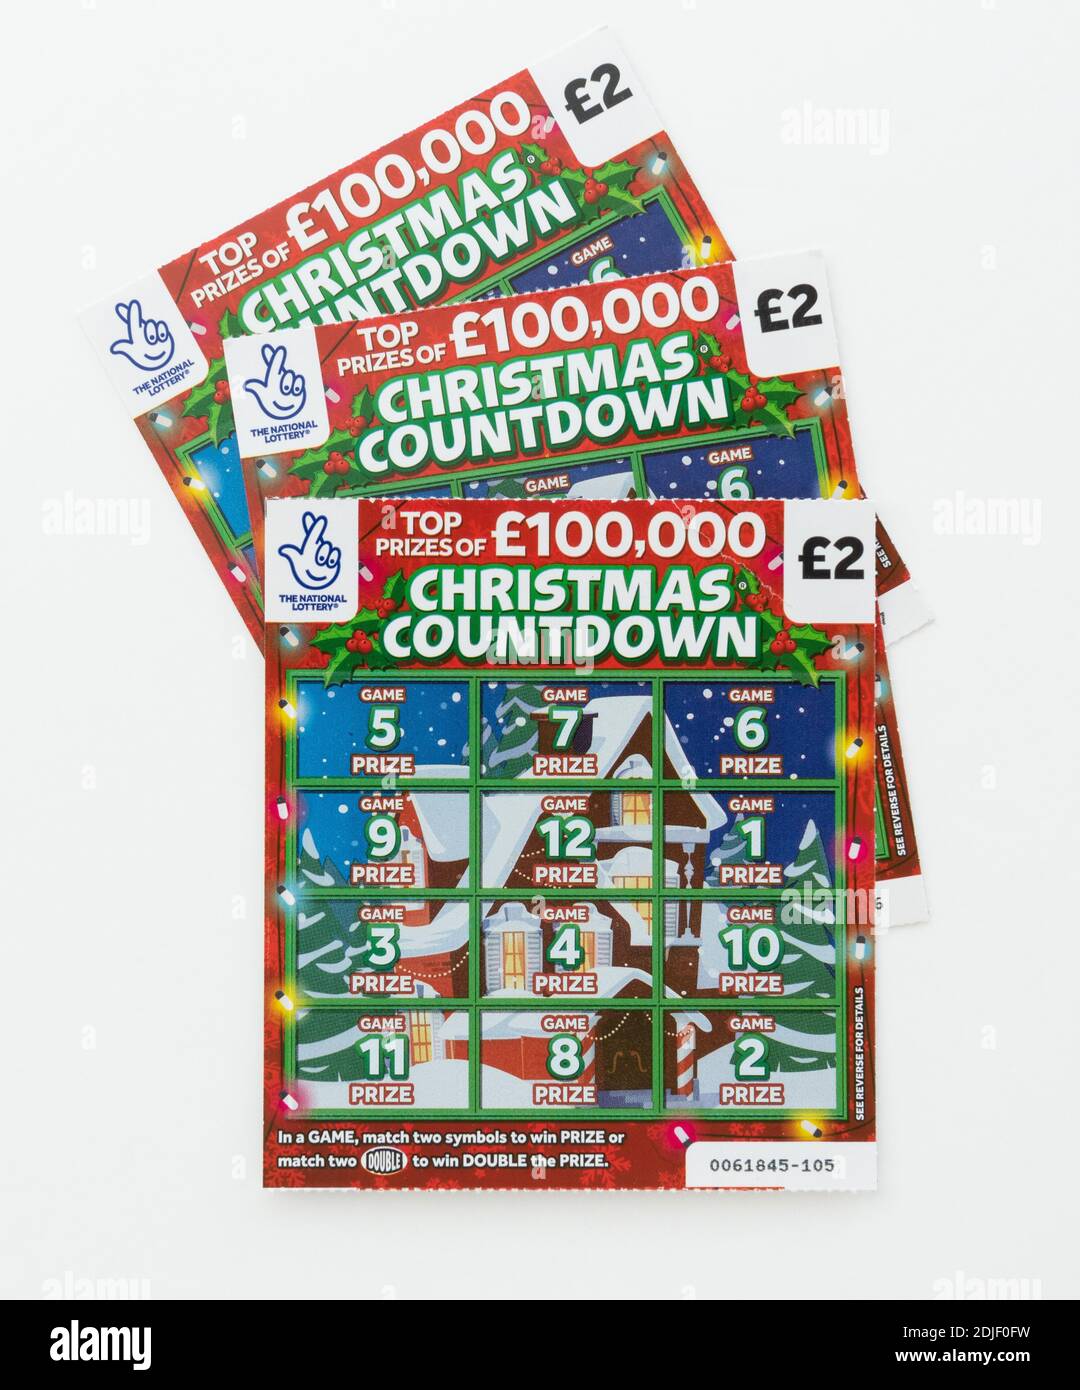 Christmas Countdown £2 Scratchcards - National Lottery UK Stockfoto